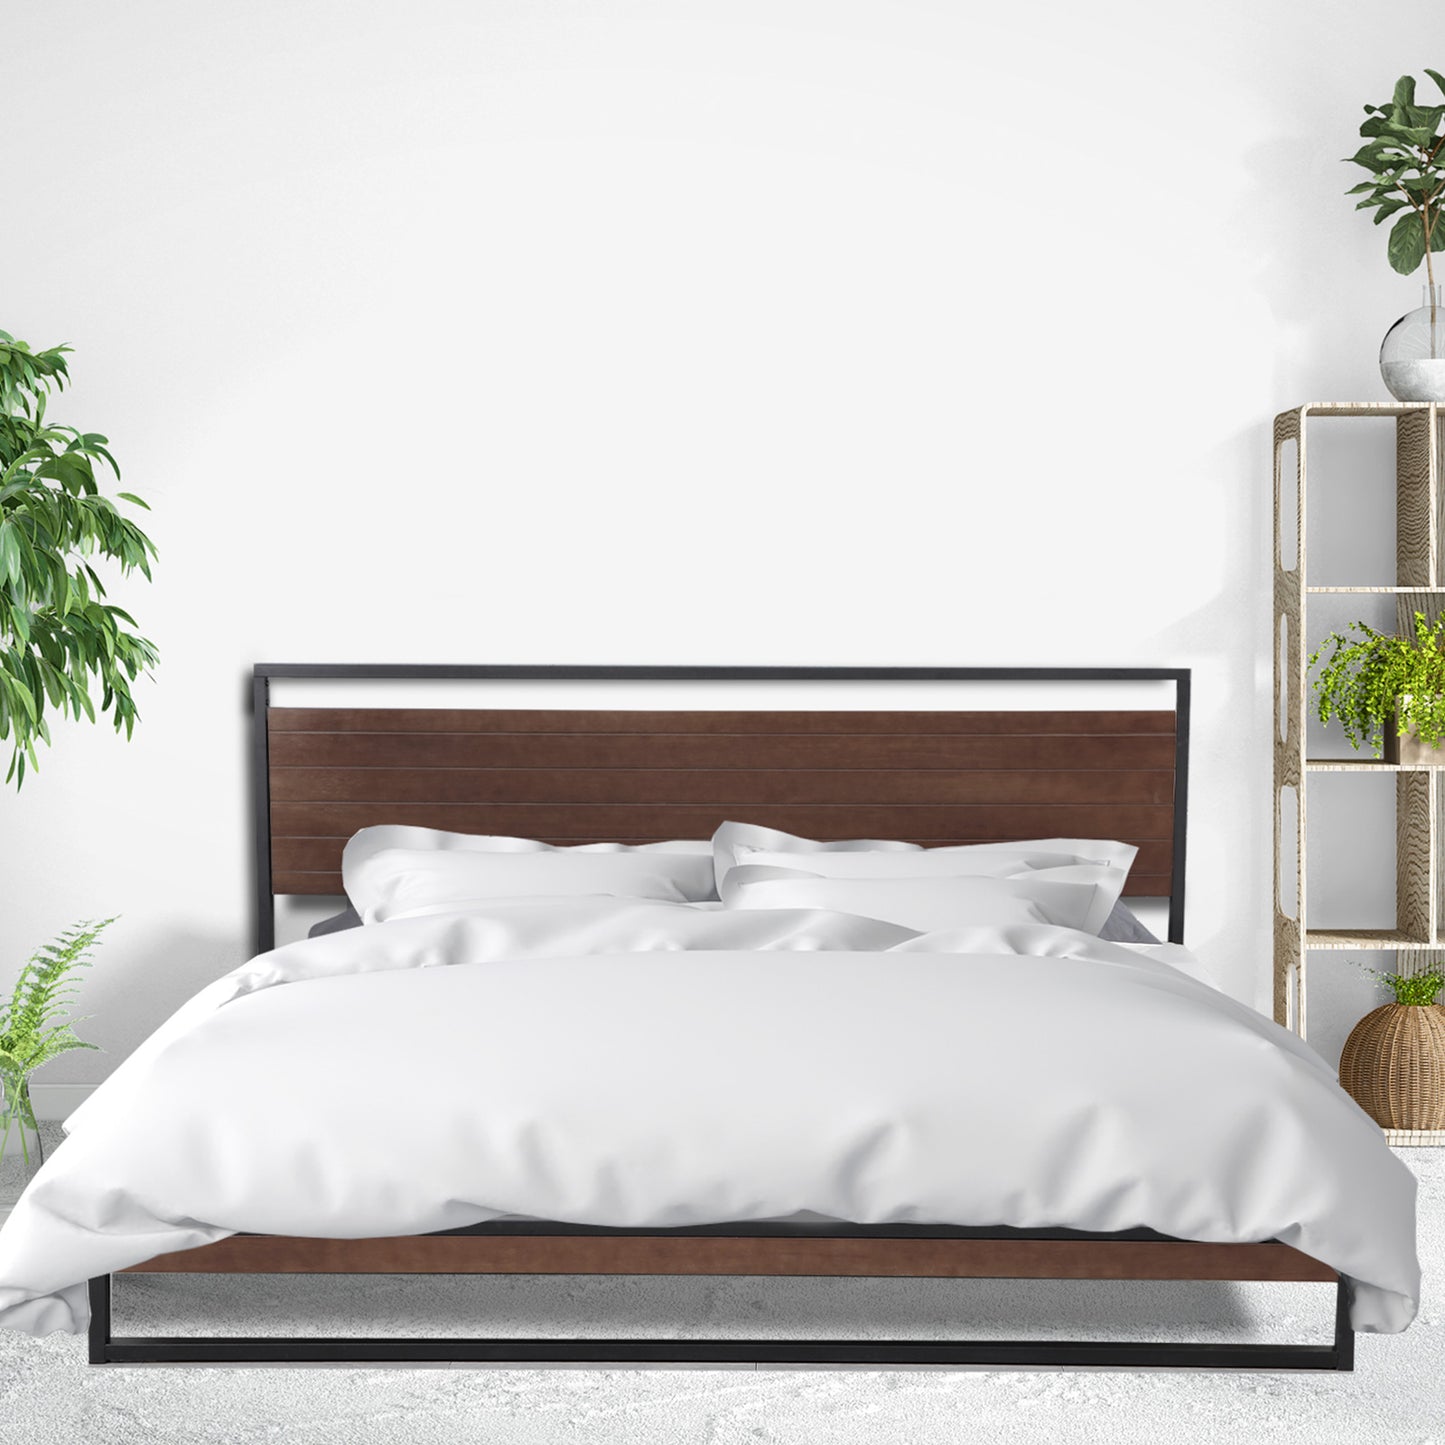 Xylia Bed Frame With Headboard - Black King